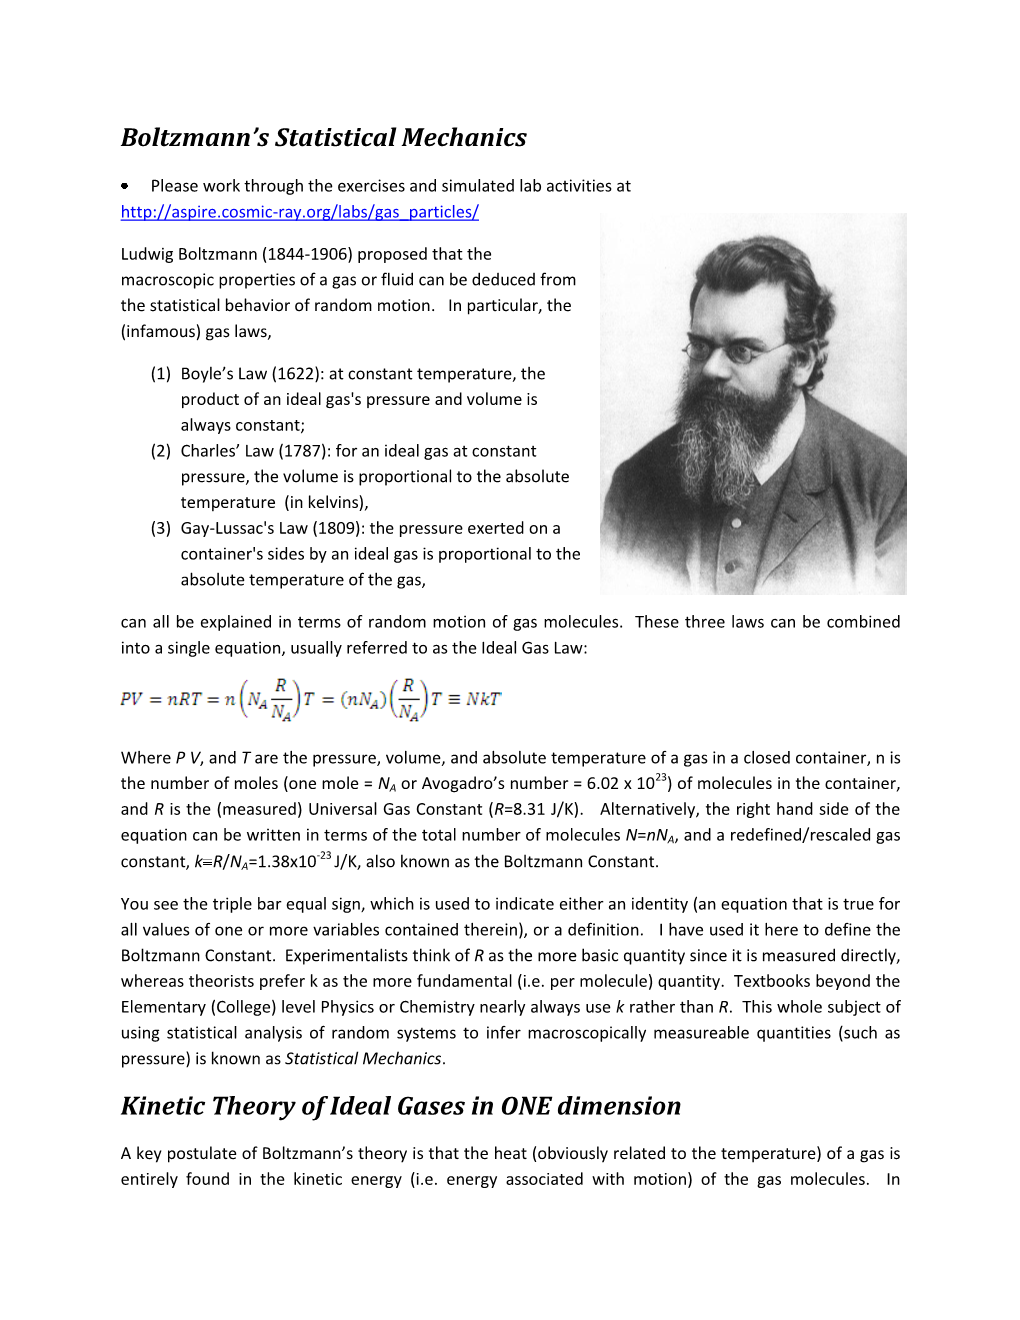 Boltzmann's Statistical Mechanics Kinetic Theory of Ideal Gases In